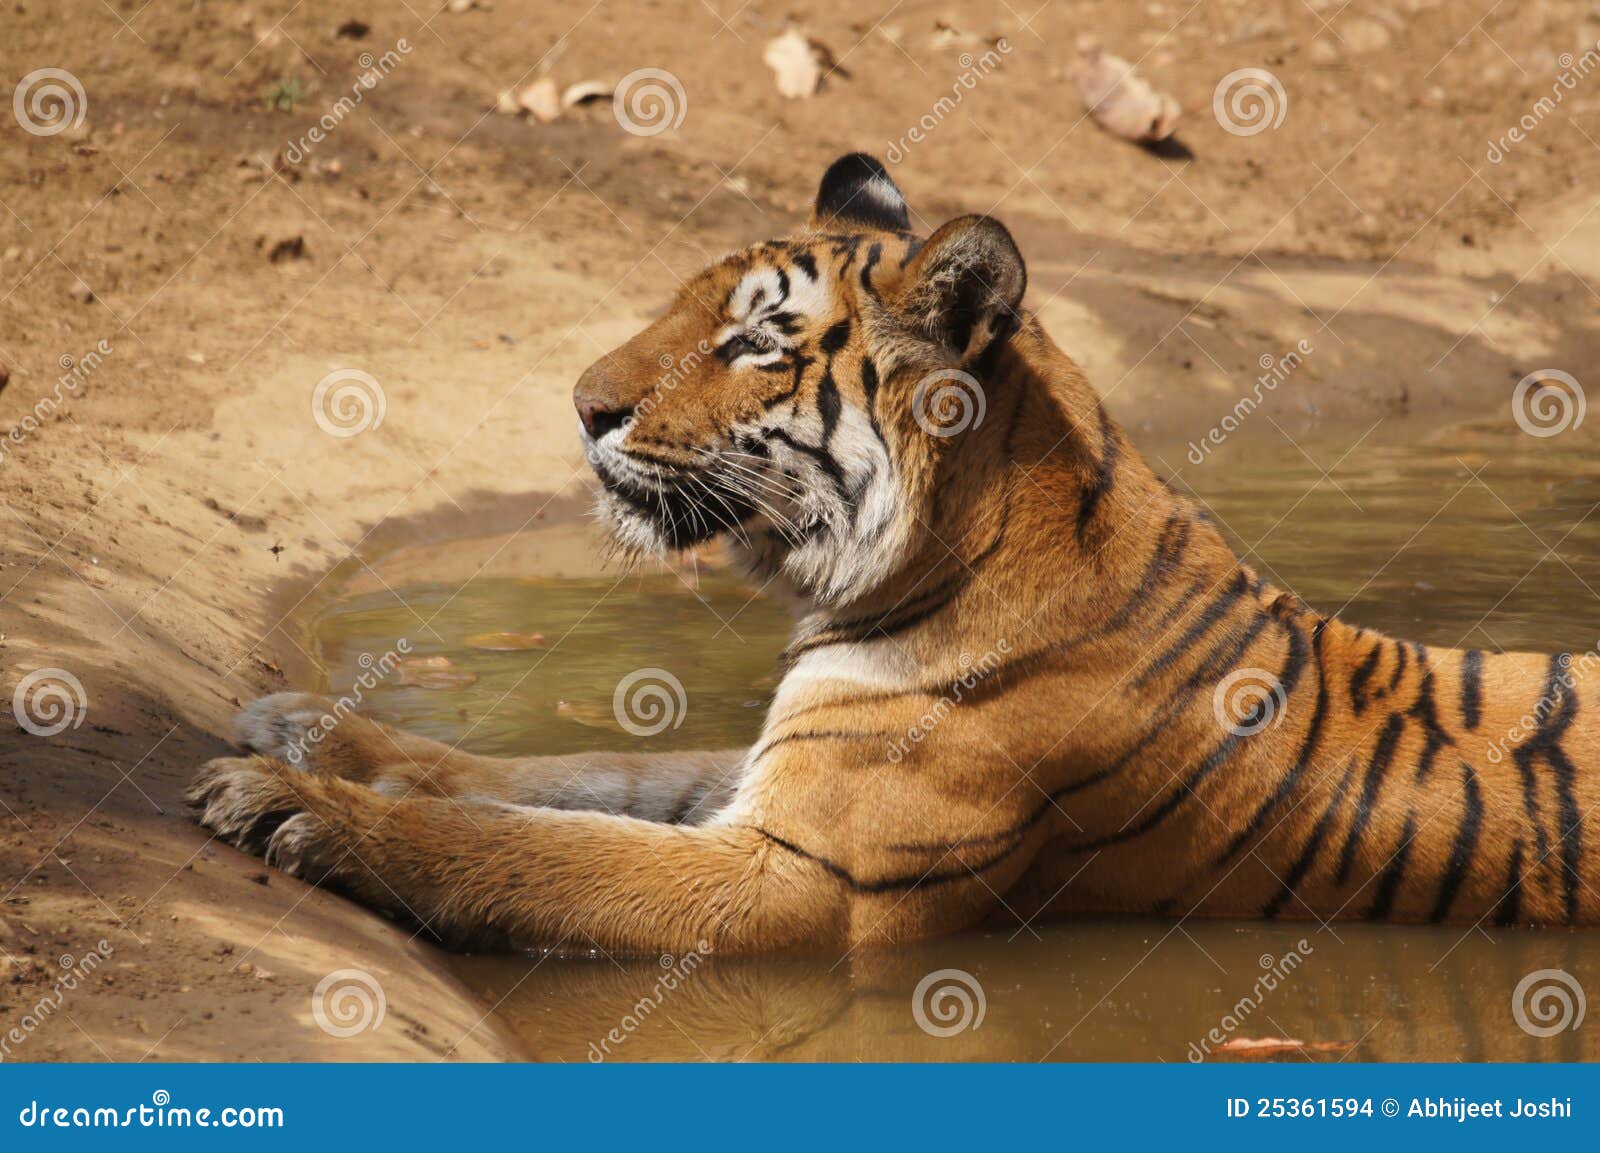 tigress sitting in water cooling off